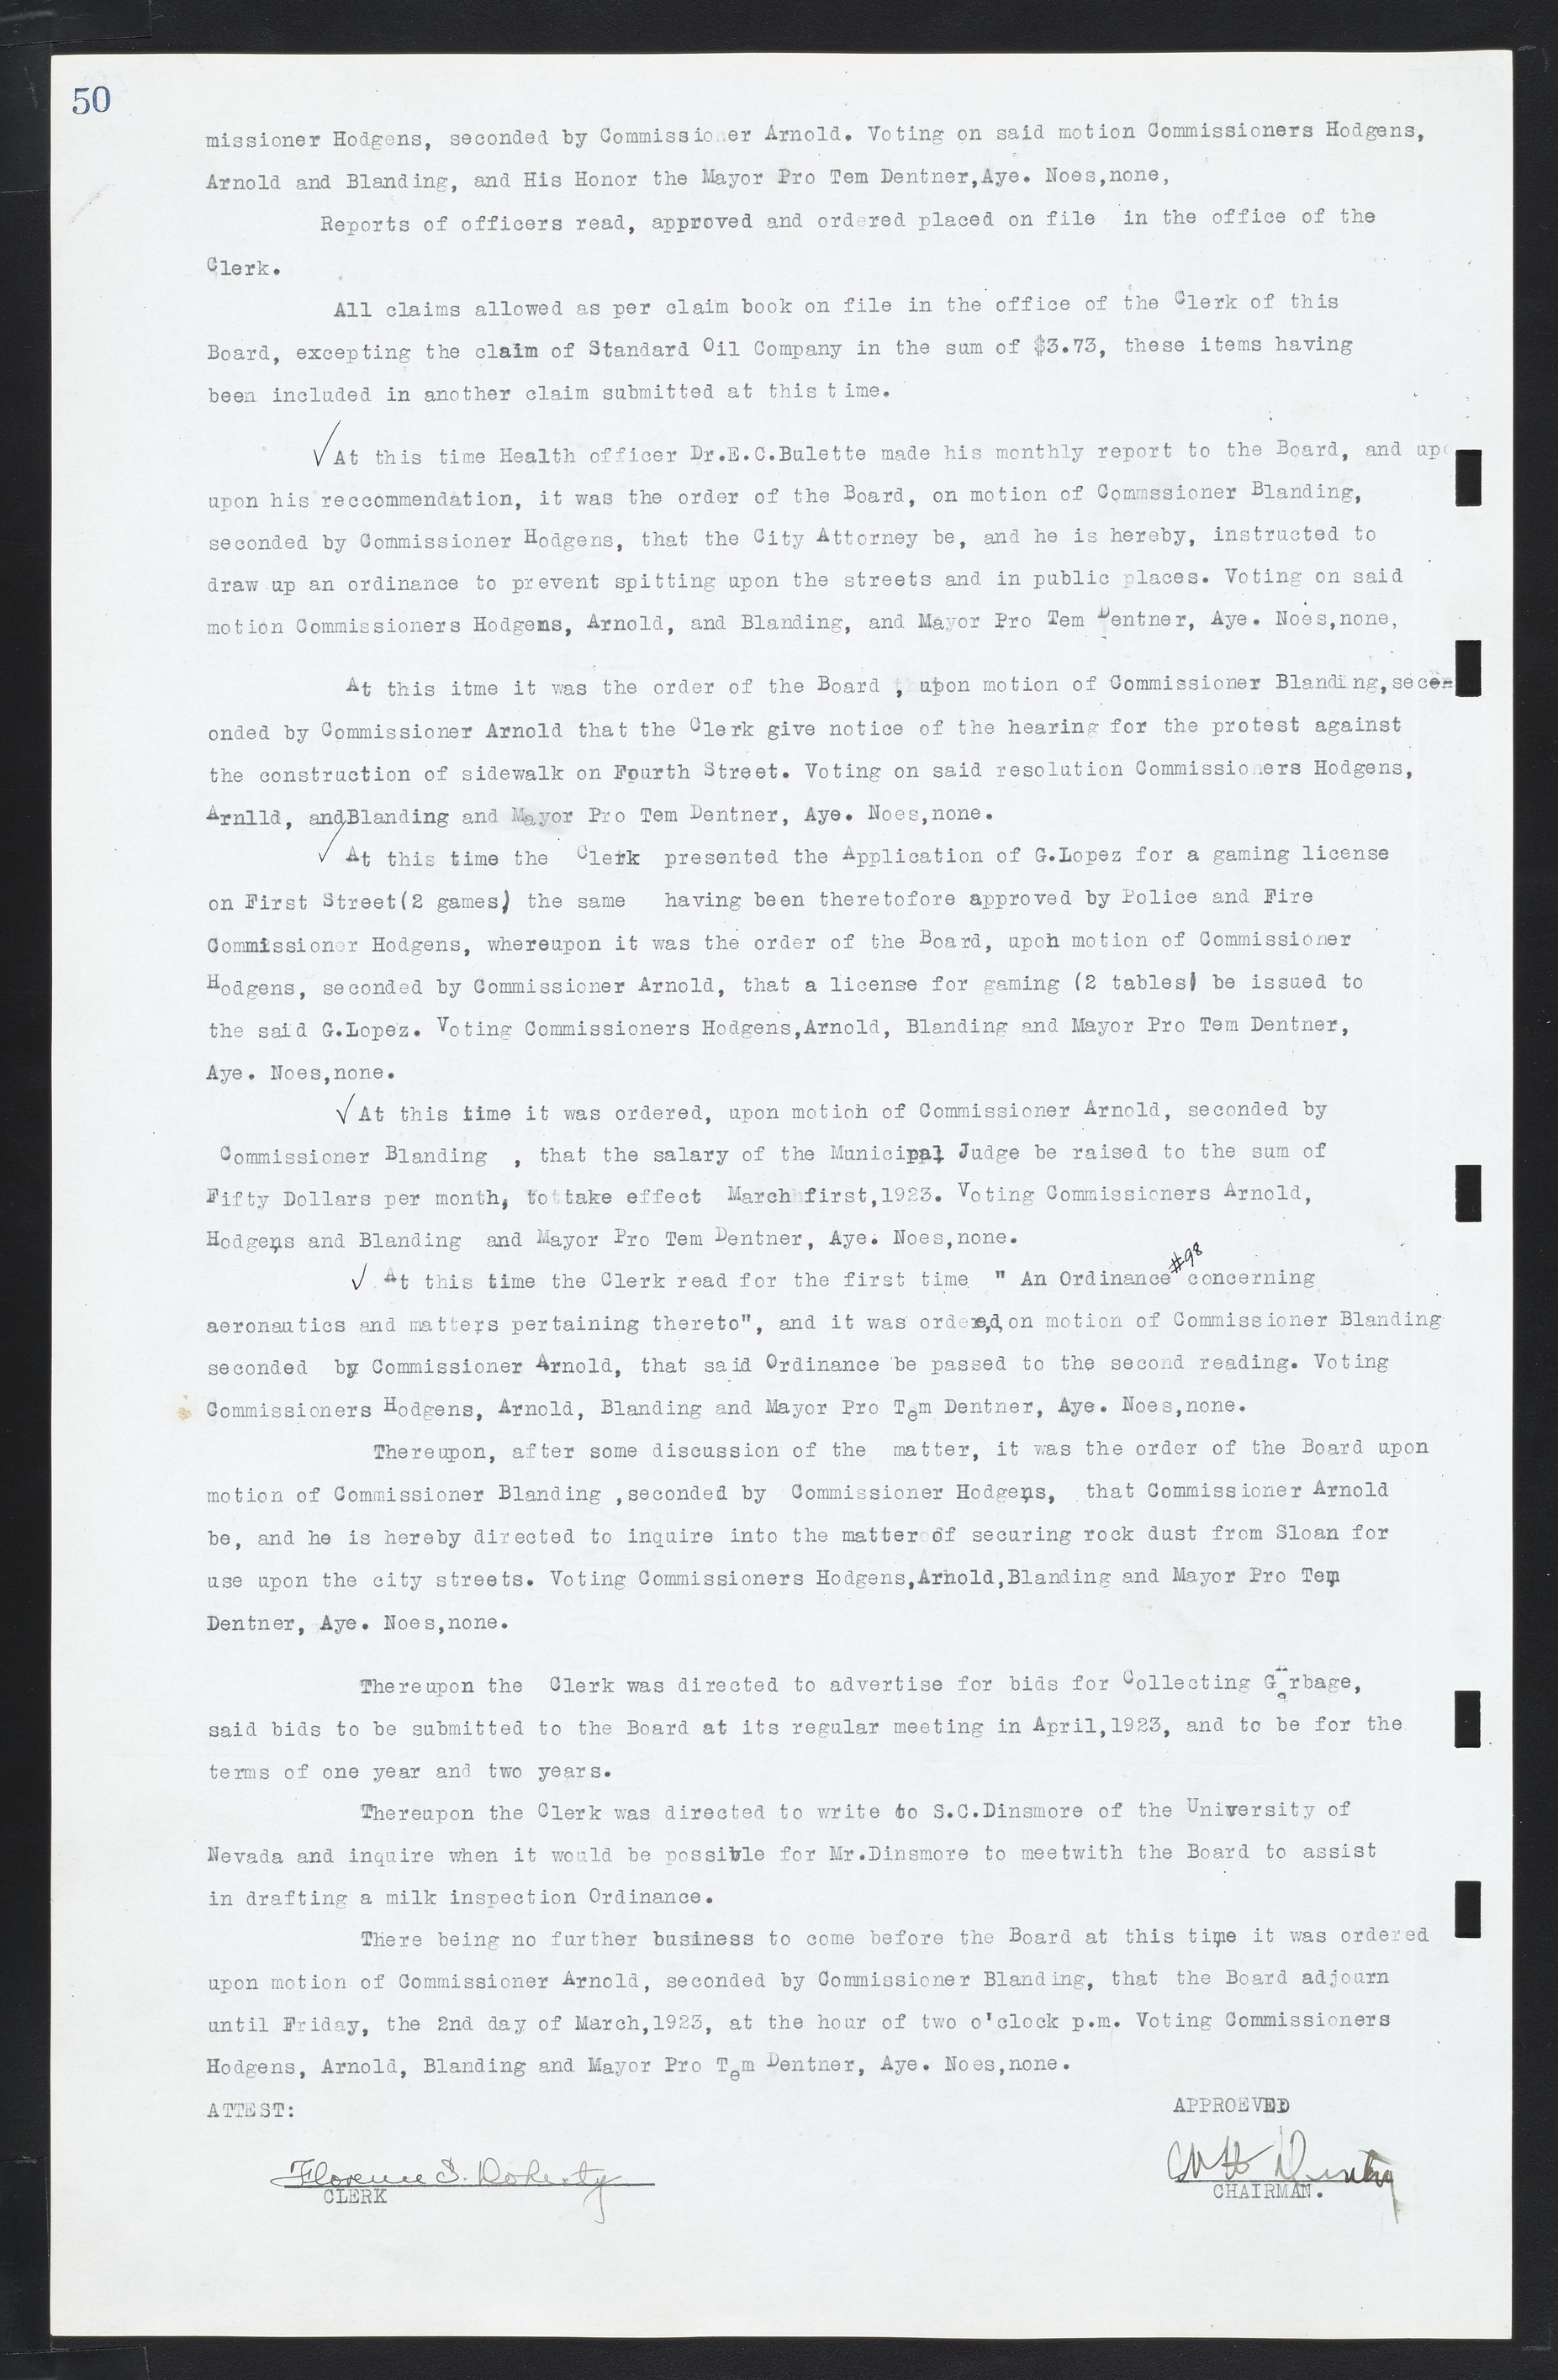 Las Vegas City Commission Minutes, March 1, 1922 to May 10, 1929, lvc000002-57